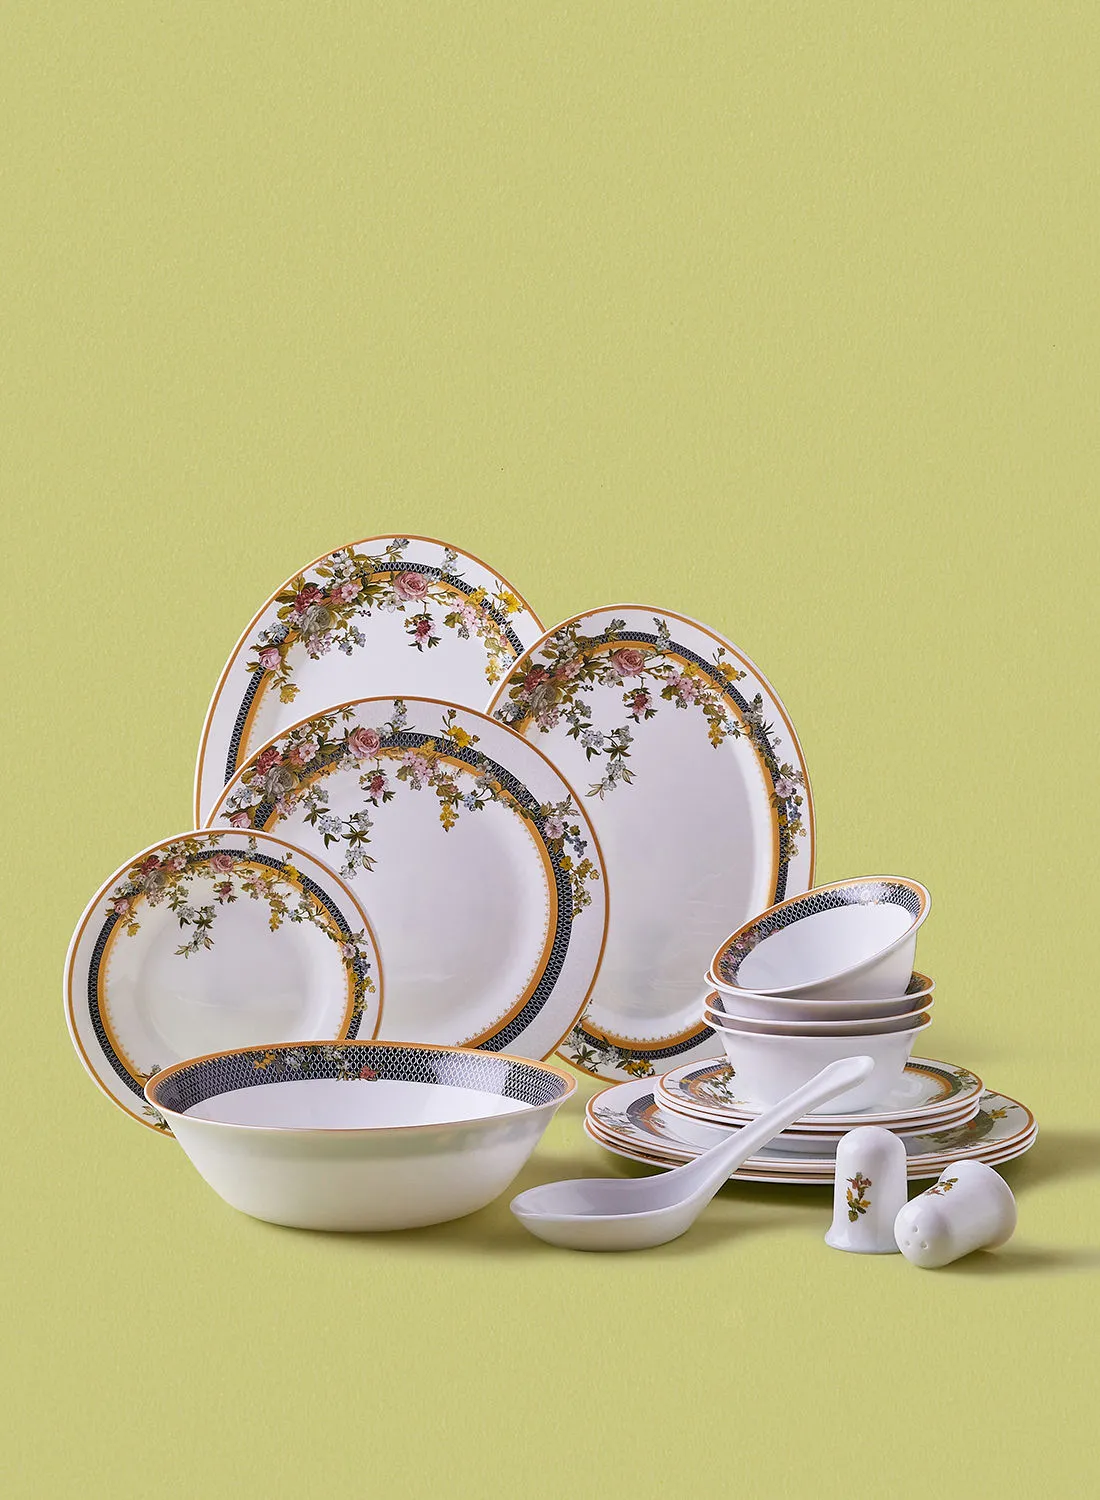 noon east 18 Piece Opalware Dinner Set - Light Weight Dishes, Plates - Dinner Plate, Side Plate, Bowl, Serving Dish And Bowl - Serves 4 - Festive Design Garden Gold